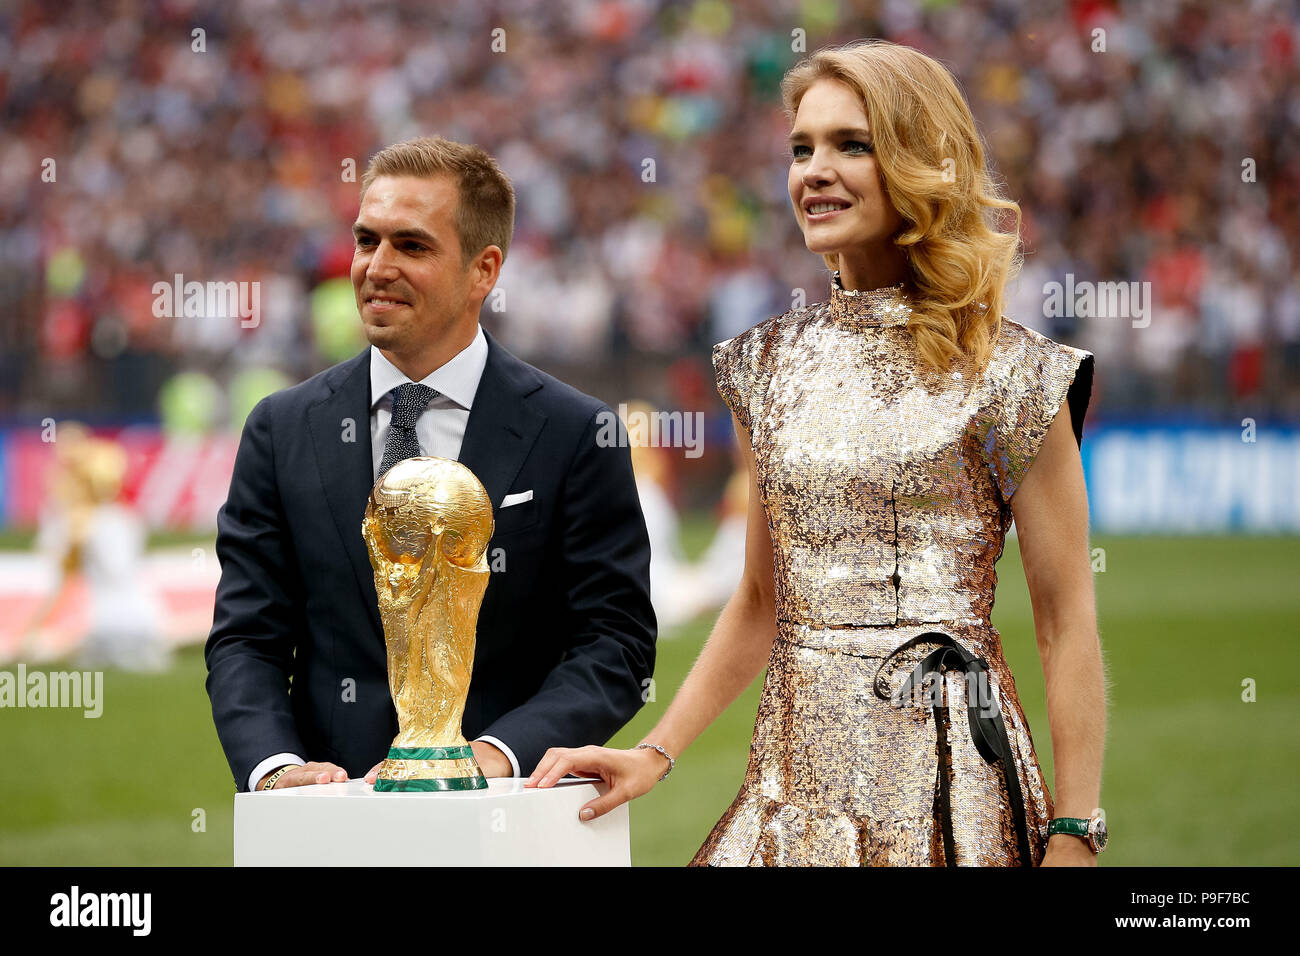 Philipp Lahm (World Champion 2014 Germany) presents the World Cup trophy  with Natalia Vodianova (r), Stock Photo, Picture And Rights Managed Image.  Pic. PAH-106679418